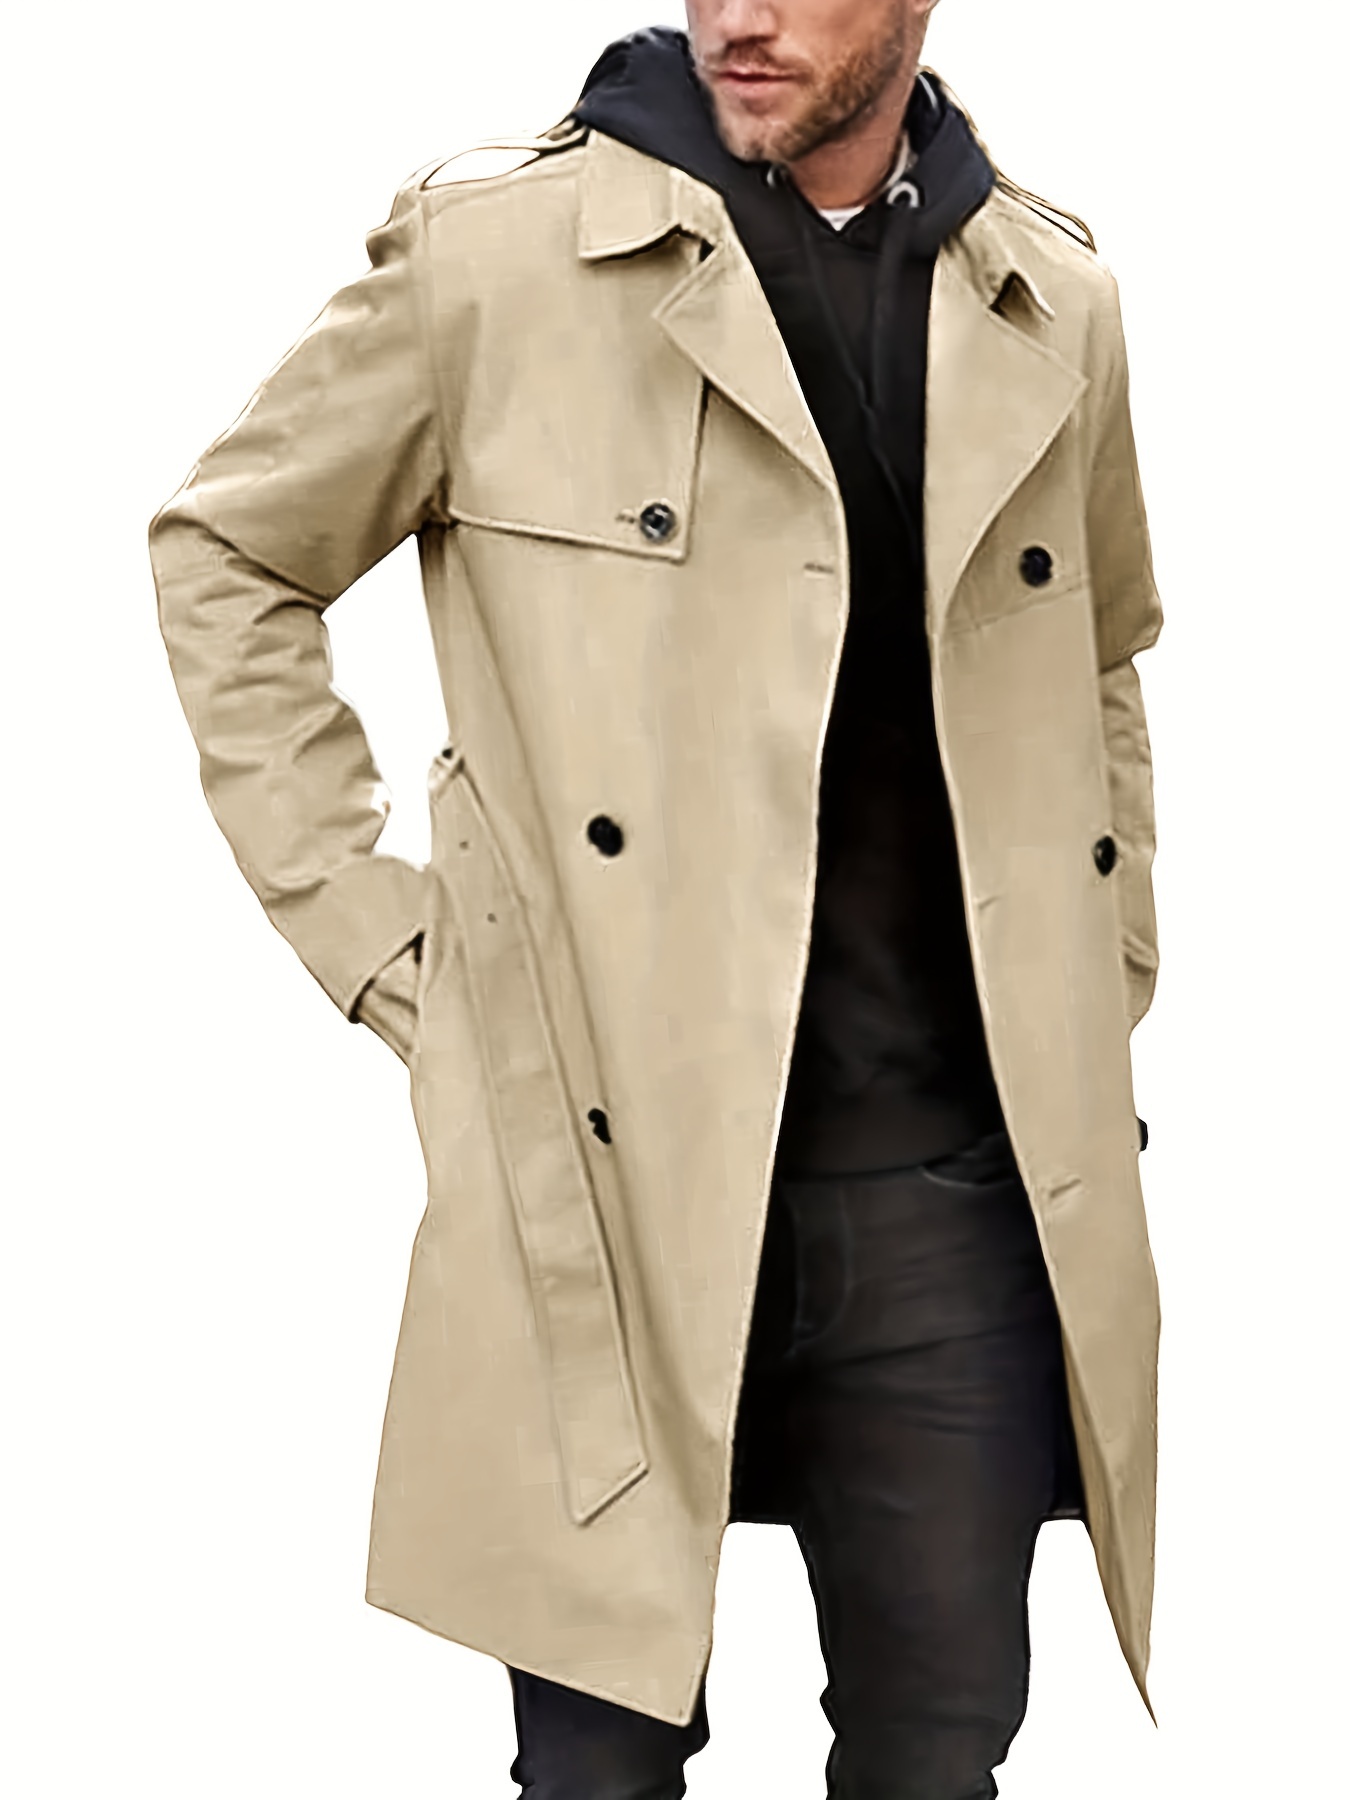  Homisy Fashion Trench Coat Men Simple Trench Jacket Double  Breasted Trench Coats Casual Long Trench Coat Outerwear : Sports & Outdoors